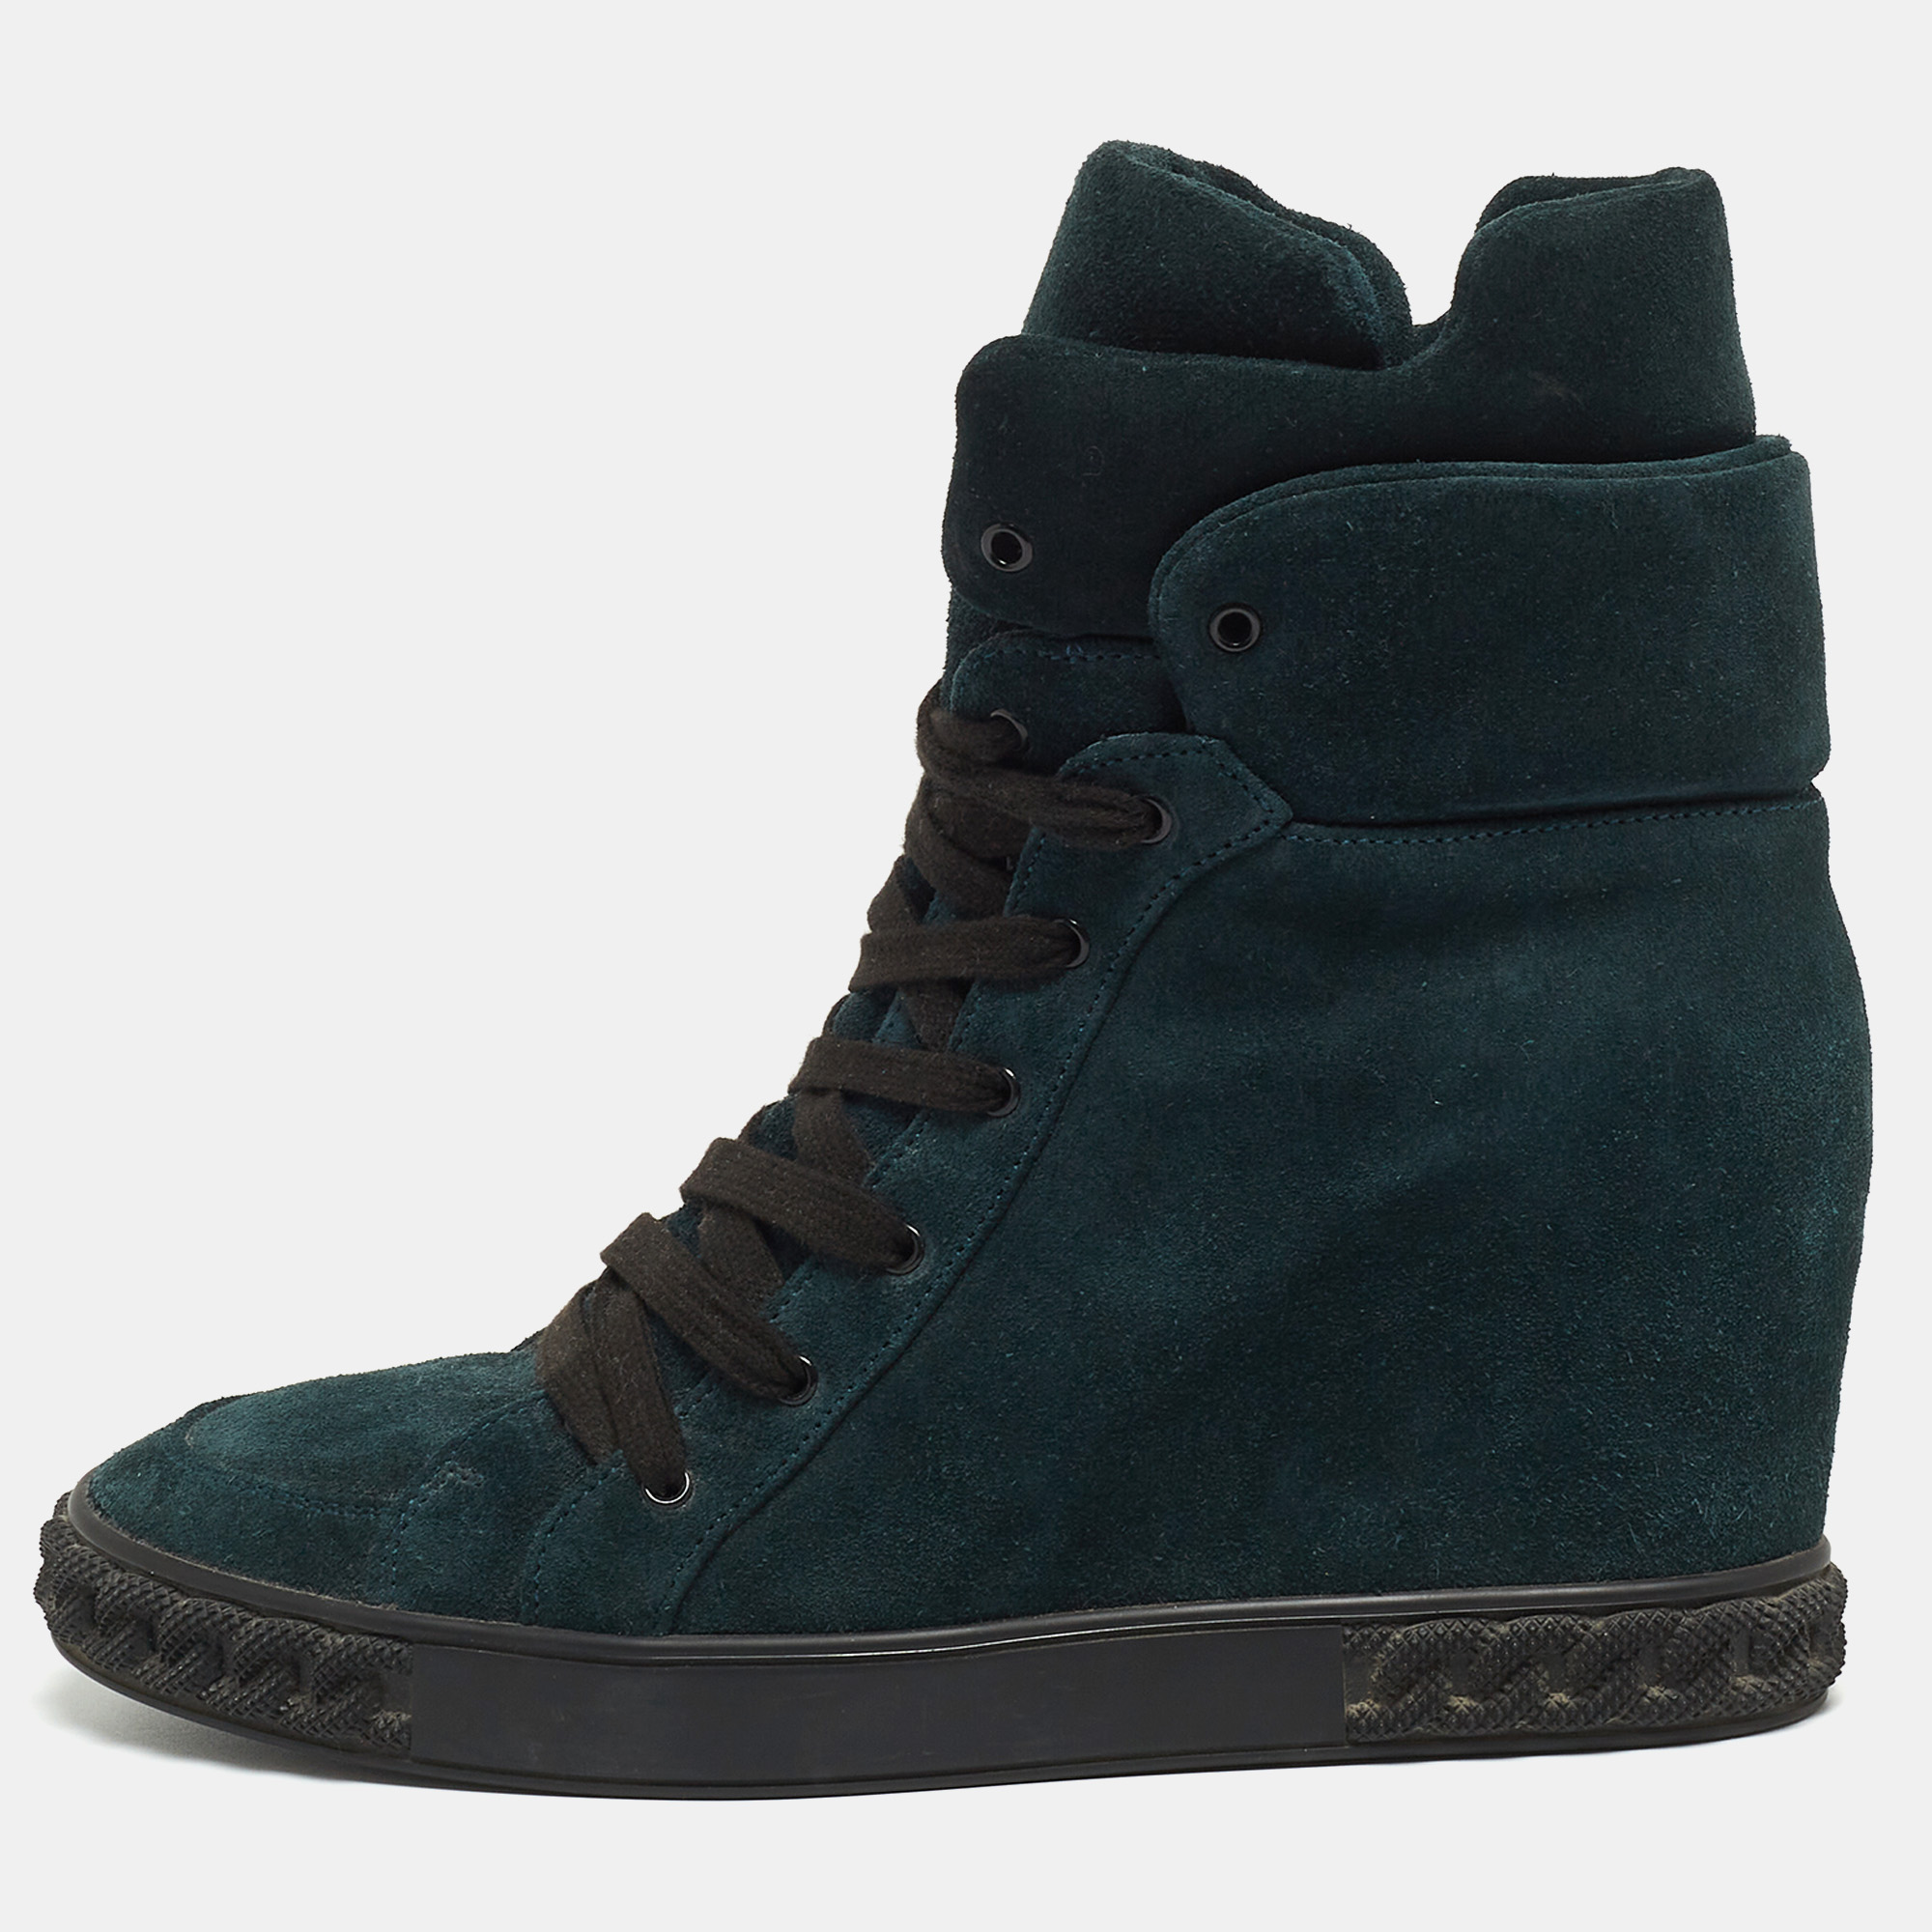 Casadei teal suede lace up ankle boots size 39